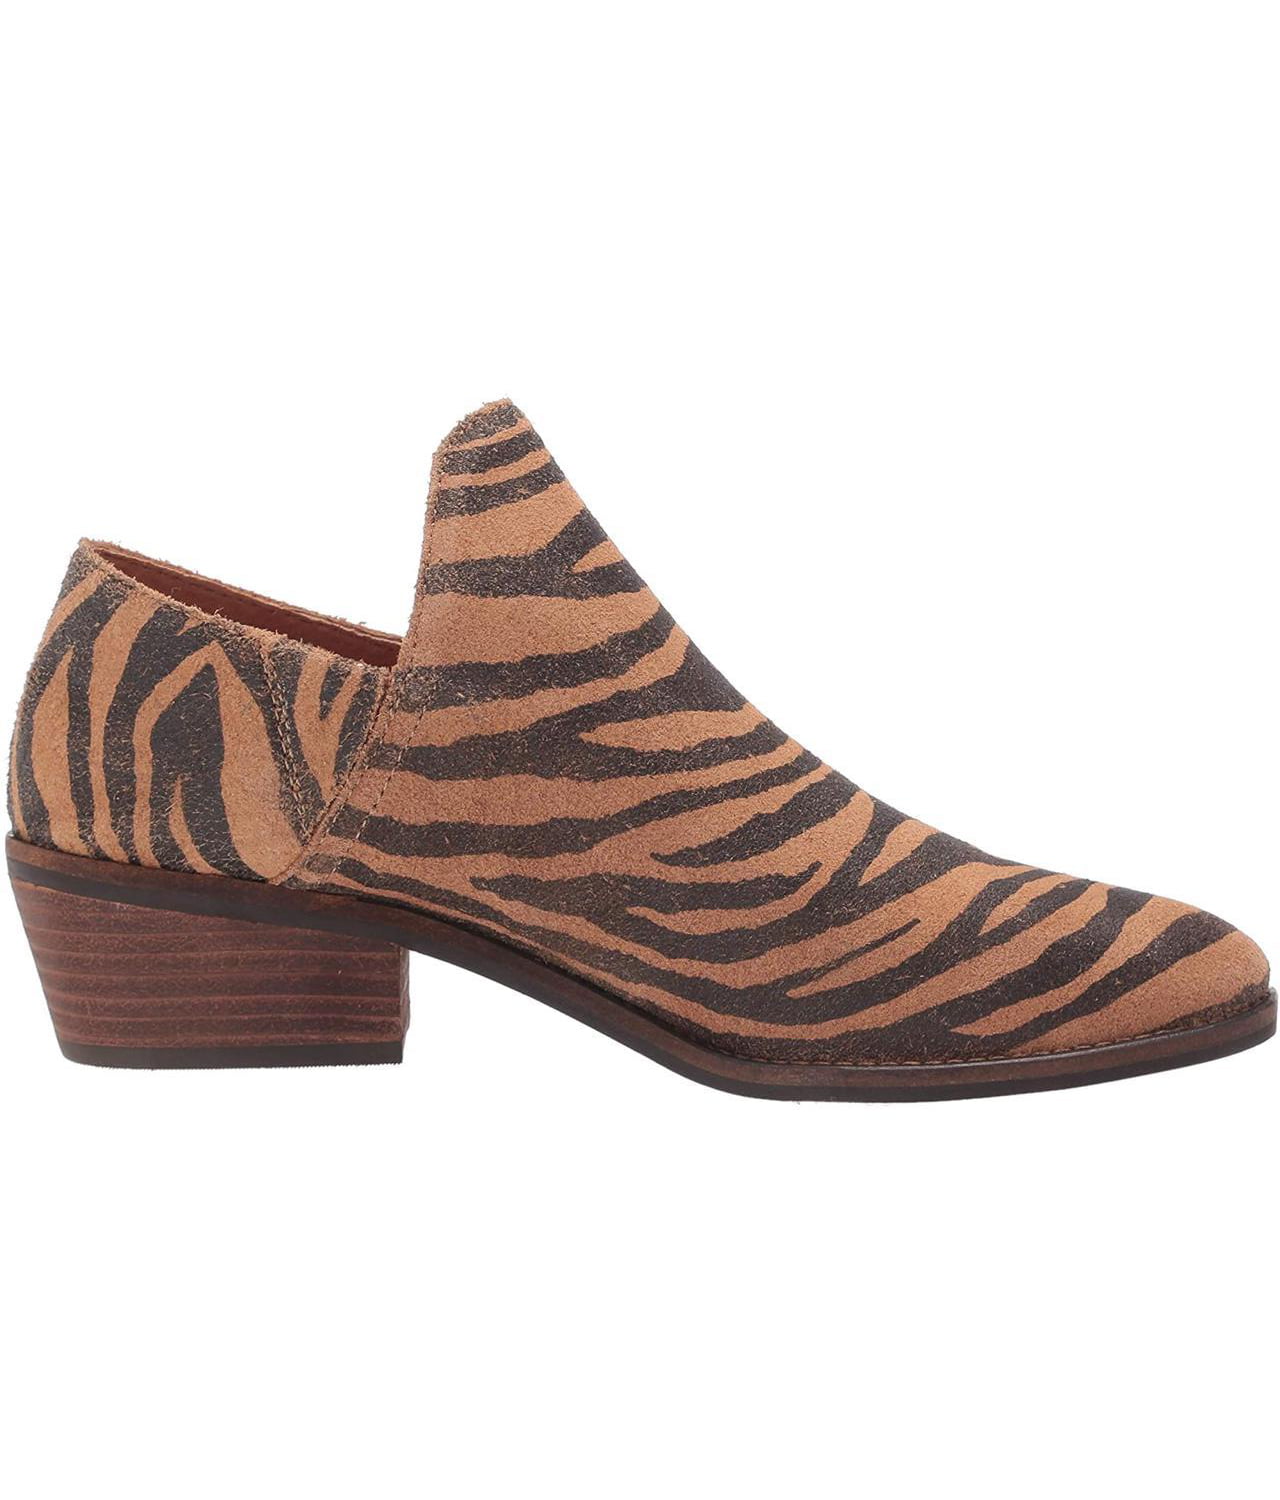 www.couturepoint.com-lucky-brand-womens-brown-leather-fausst-crashback-booties